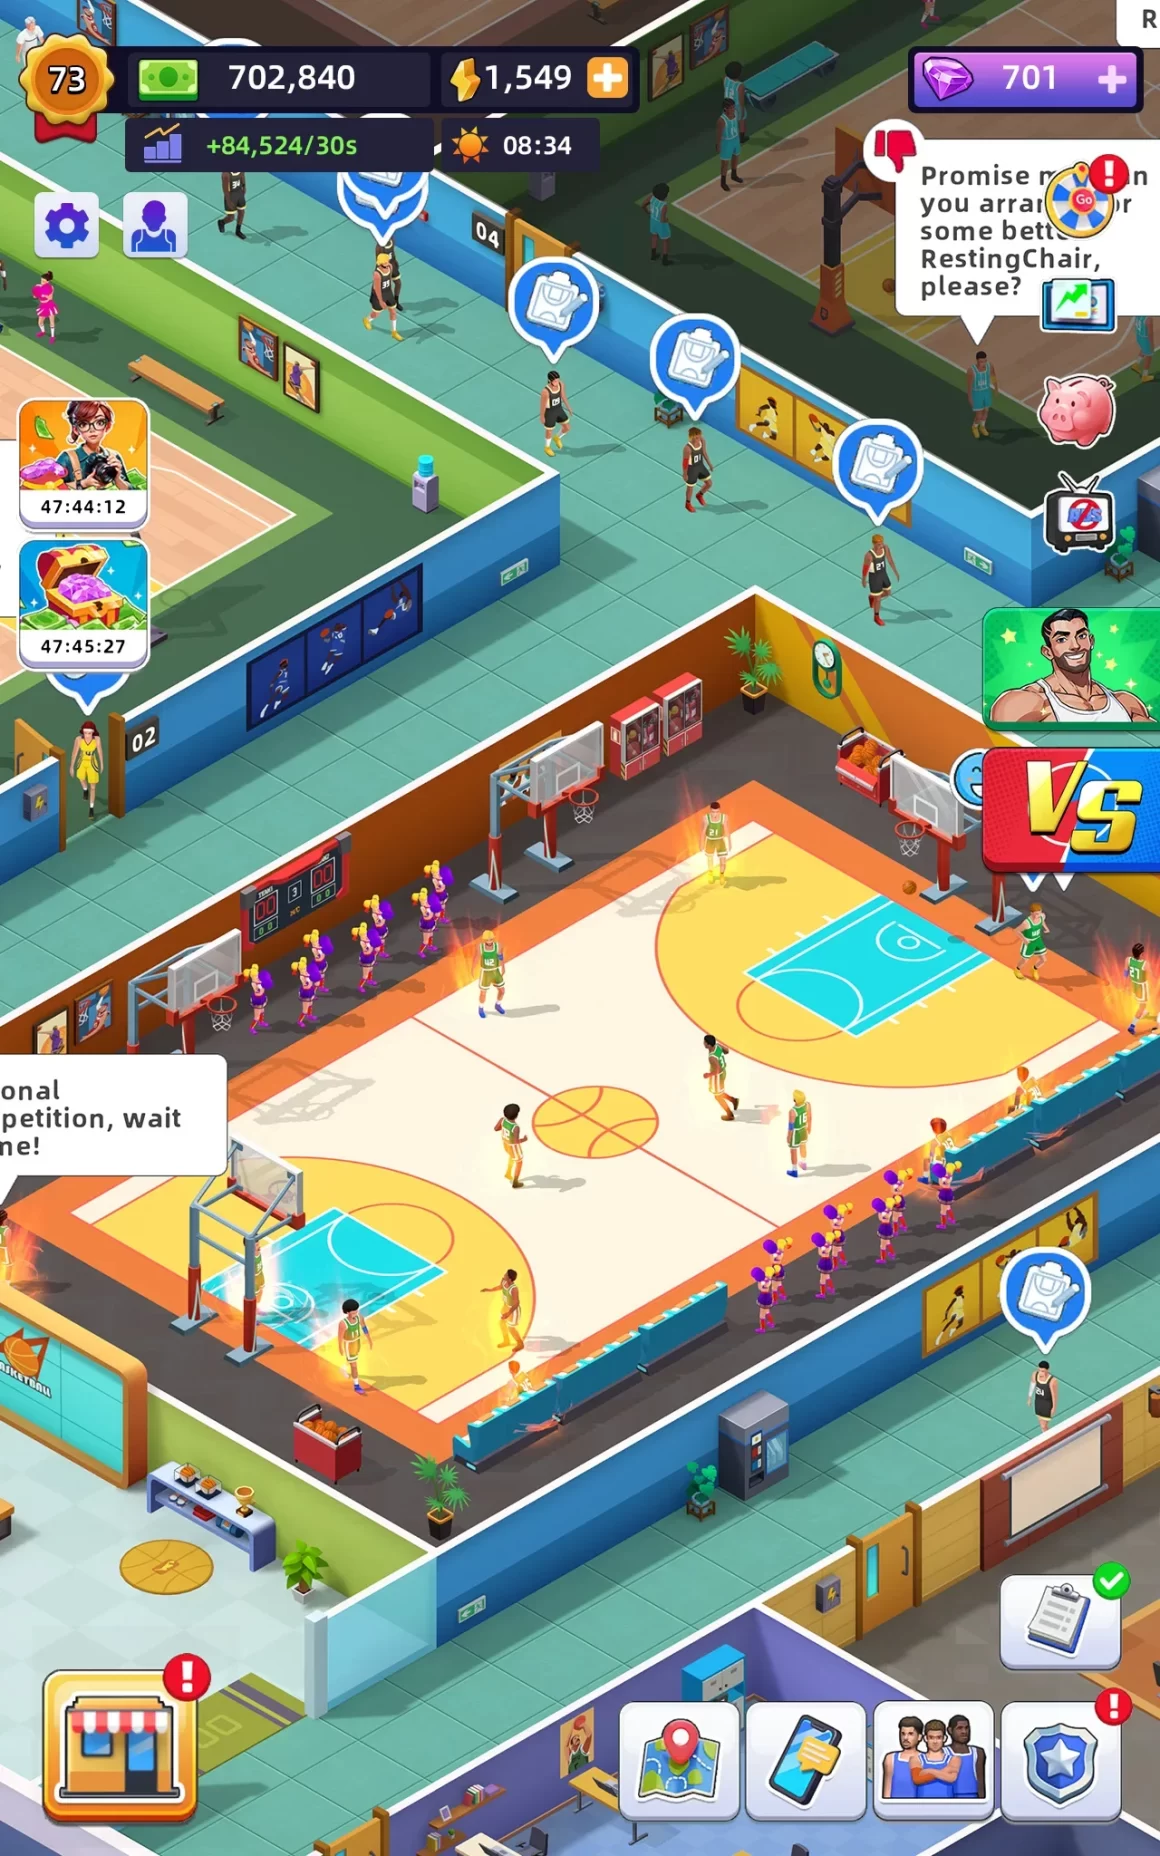 unnamed 26 3 1160x1856 - Idle Basketball Arena Tycoon Mod Apk V1.2.1 (Unlimited Money)